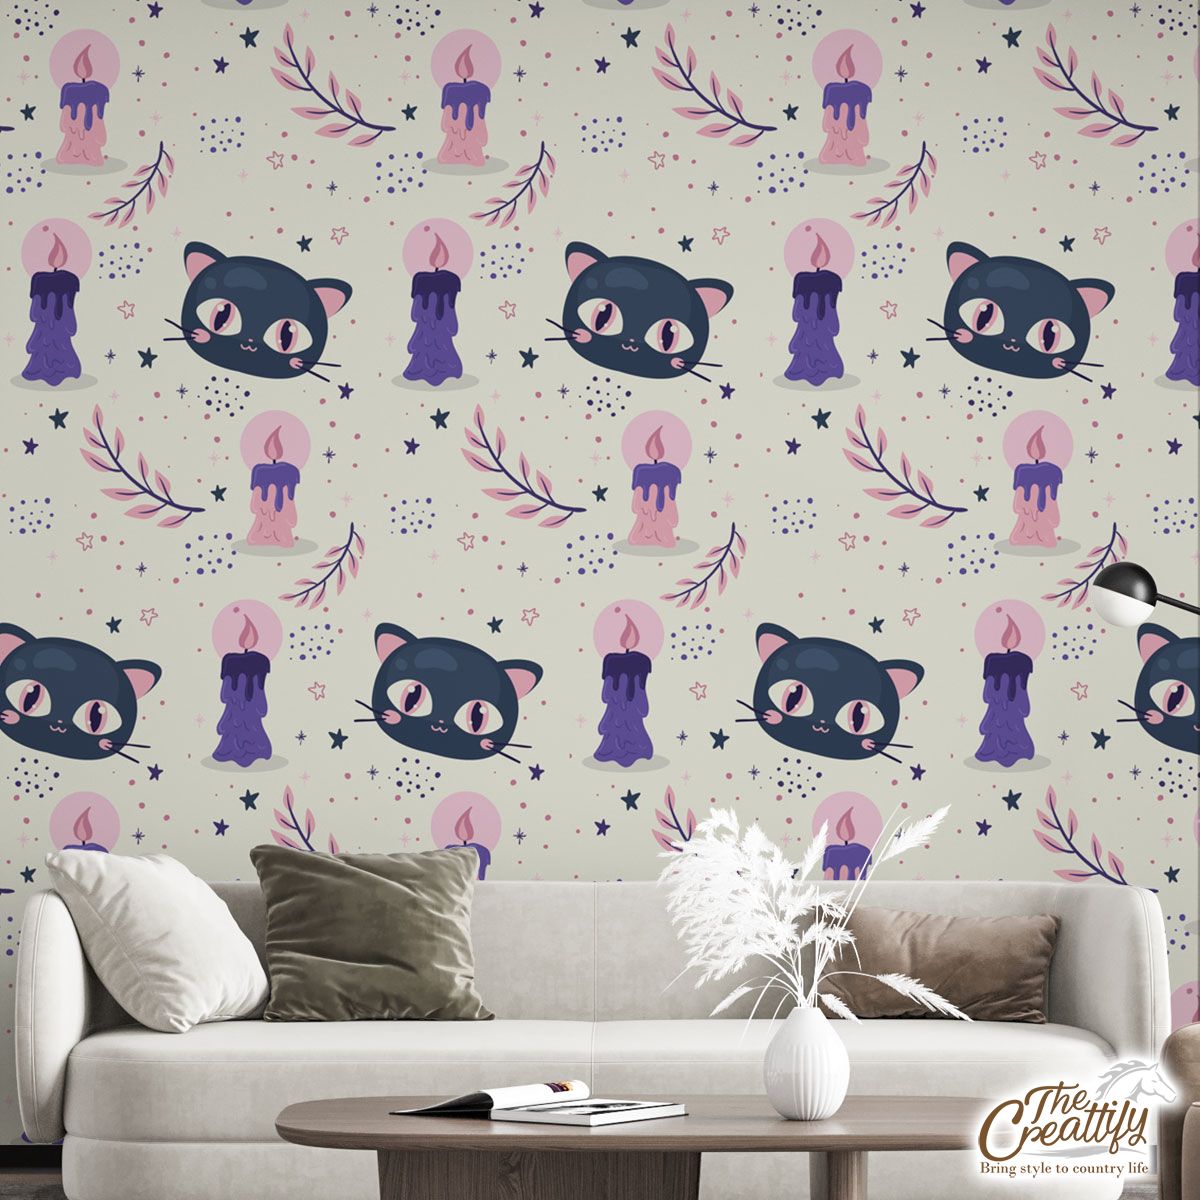 Happy Halloween With Black Cat On The Light Background Wall Mural